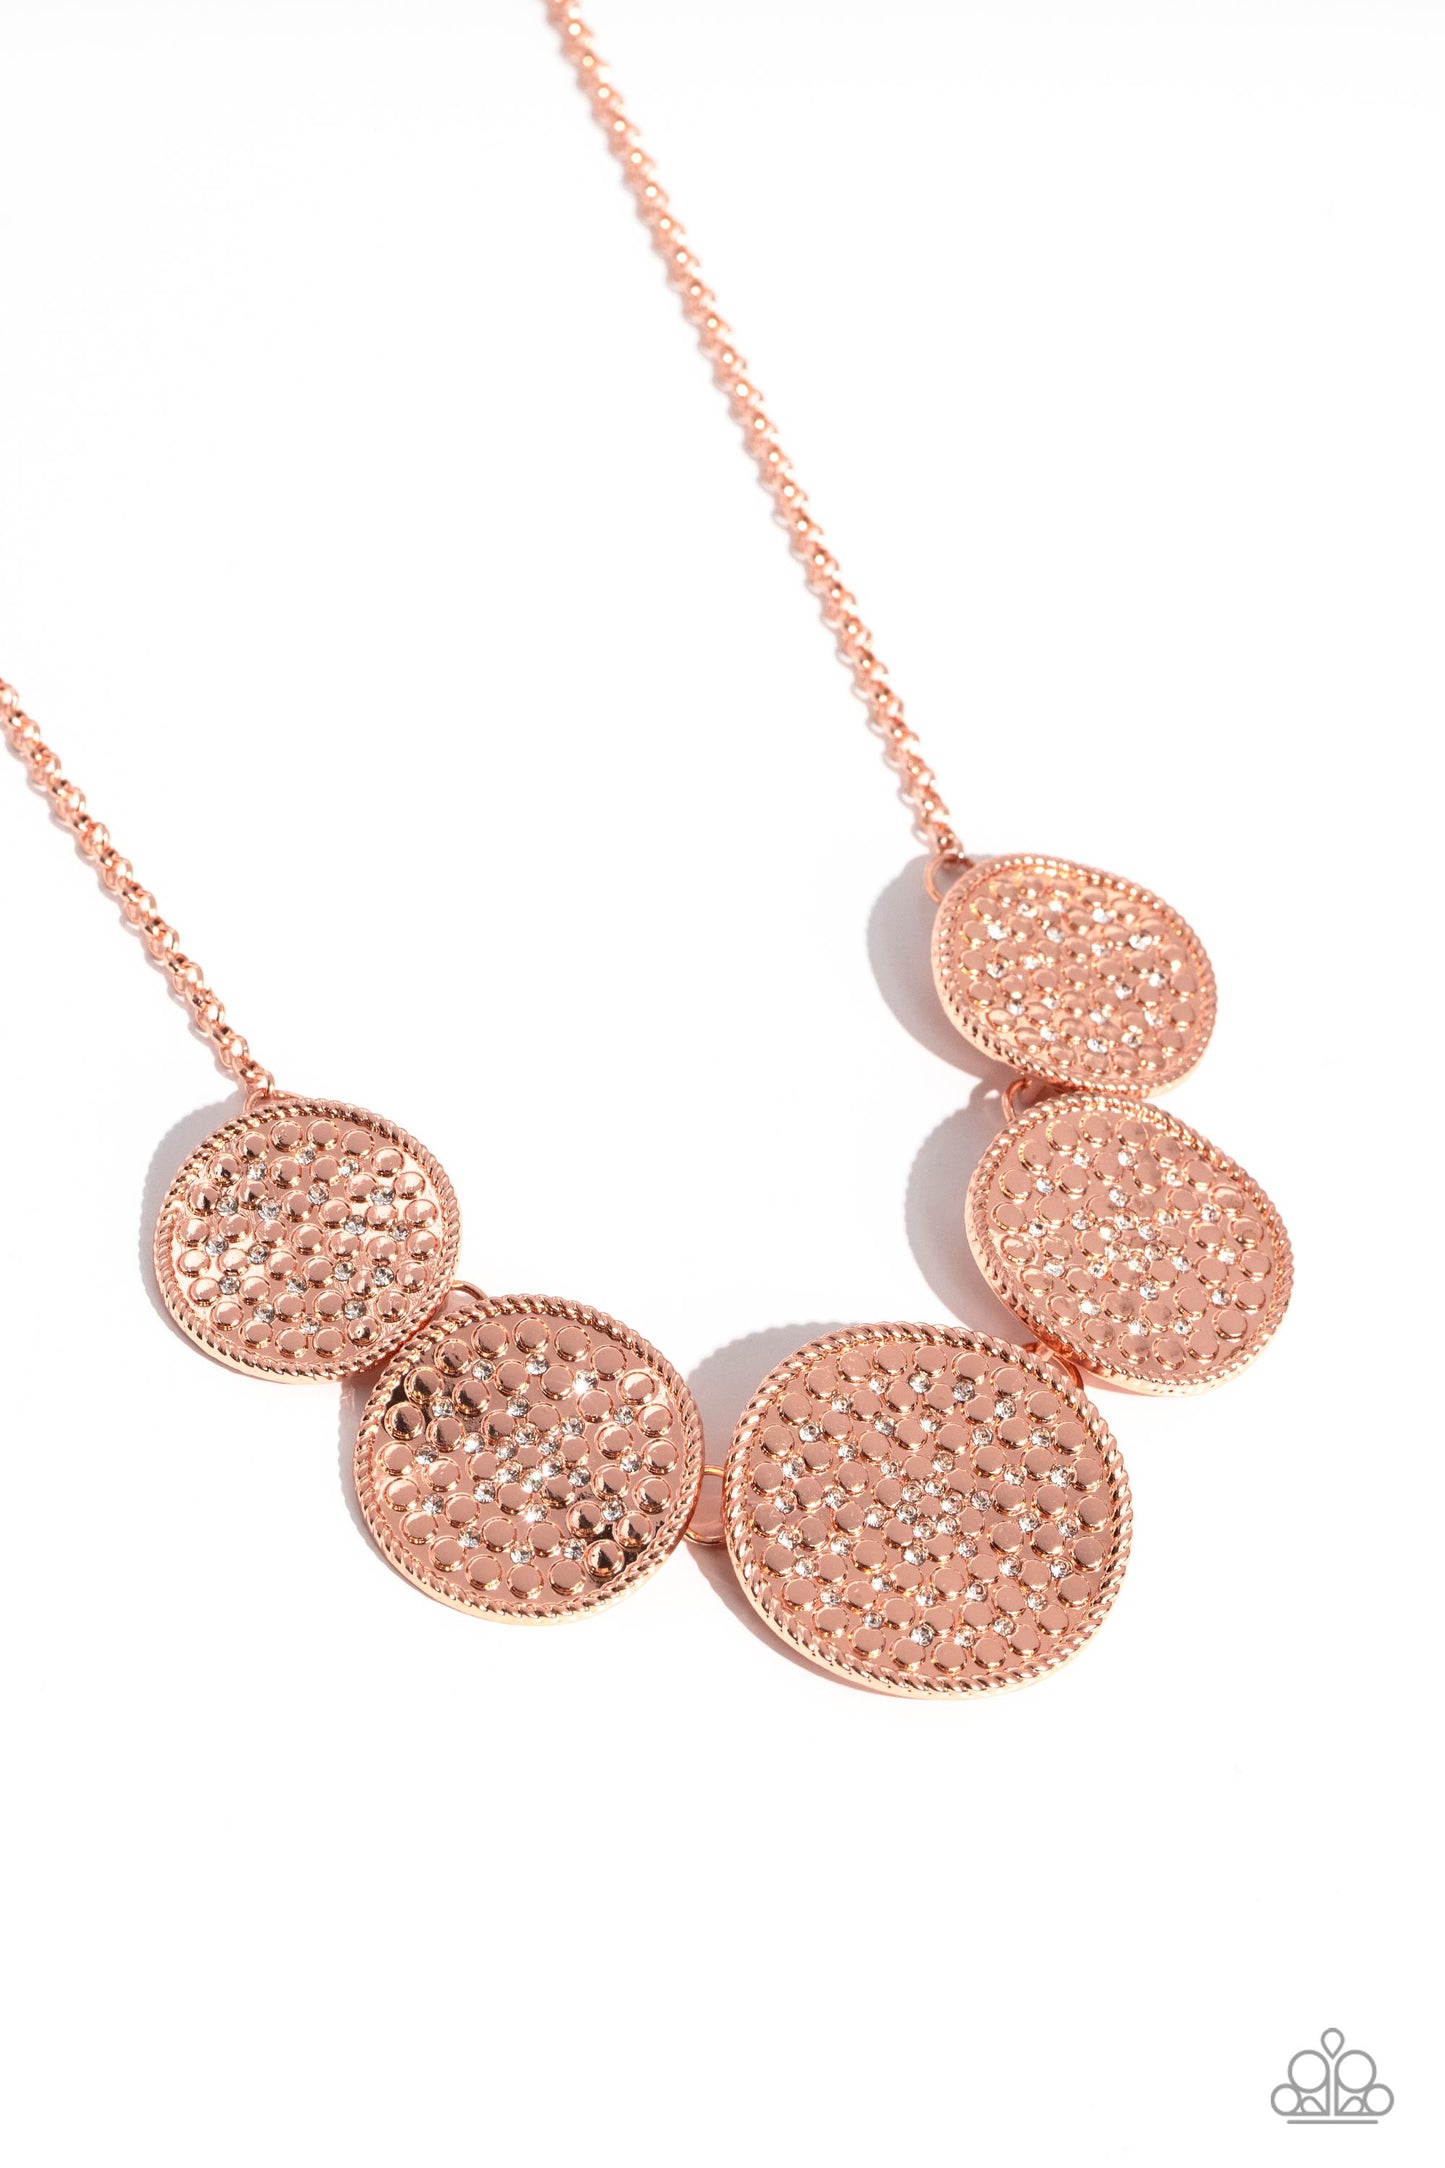 Paparazzi Necklaces - Medaled Mosaic - Copper